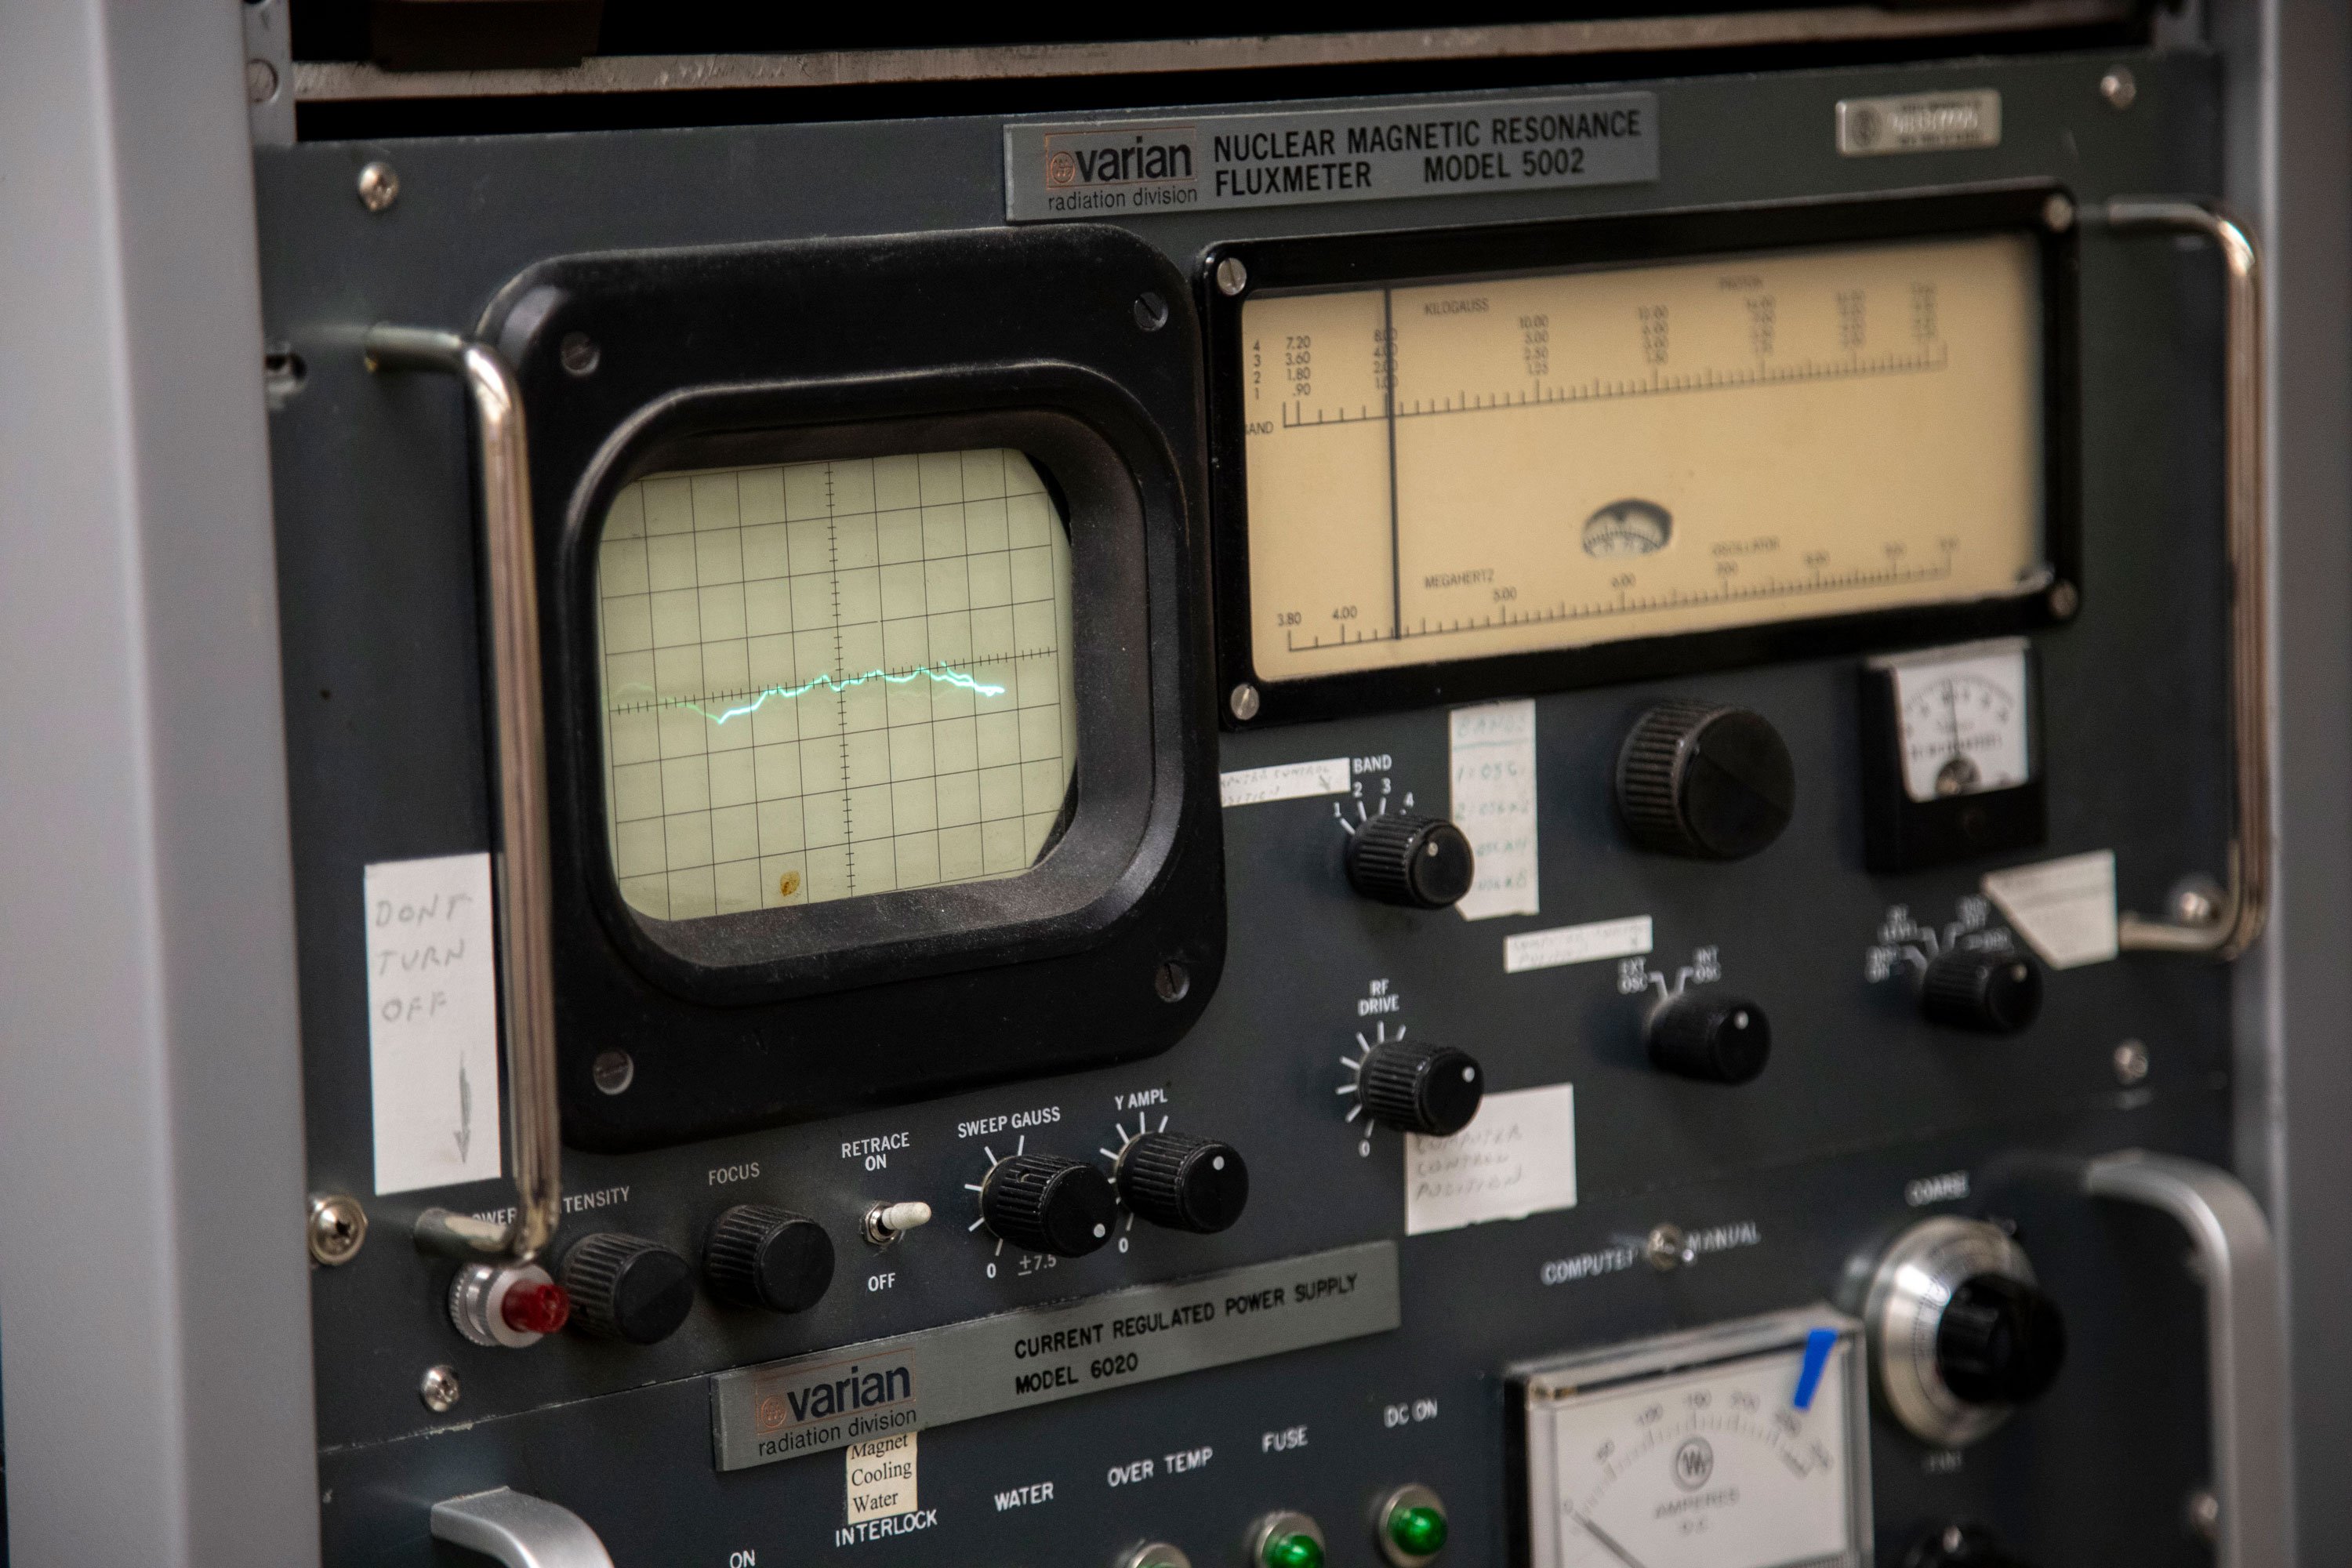 A control board with multiple dials and a display showing data. The label says Varian Nuclear Magnetic Resonance Fluxmeter Model 5002.